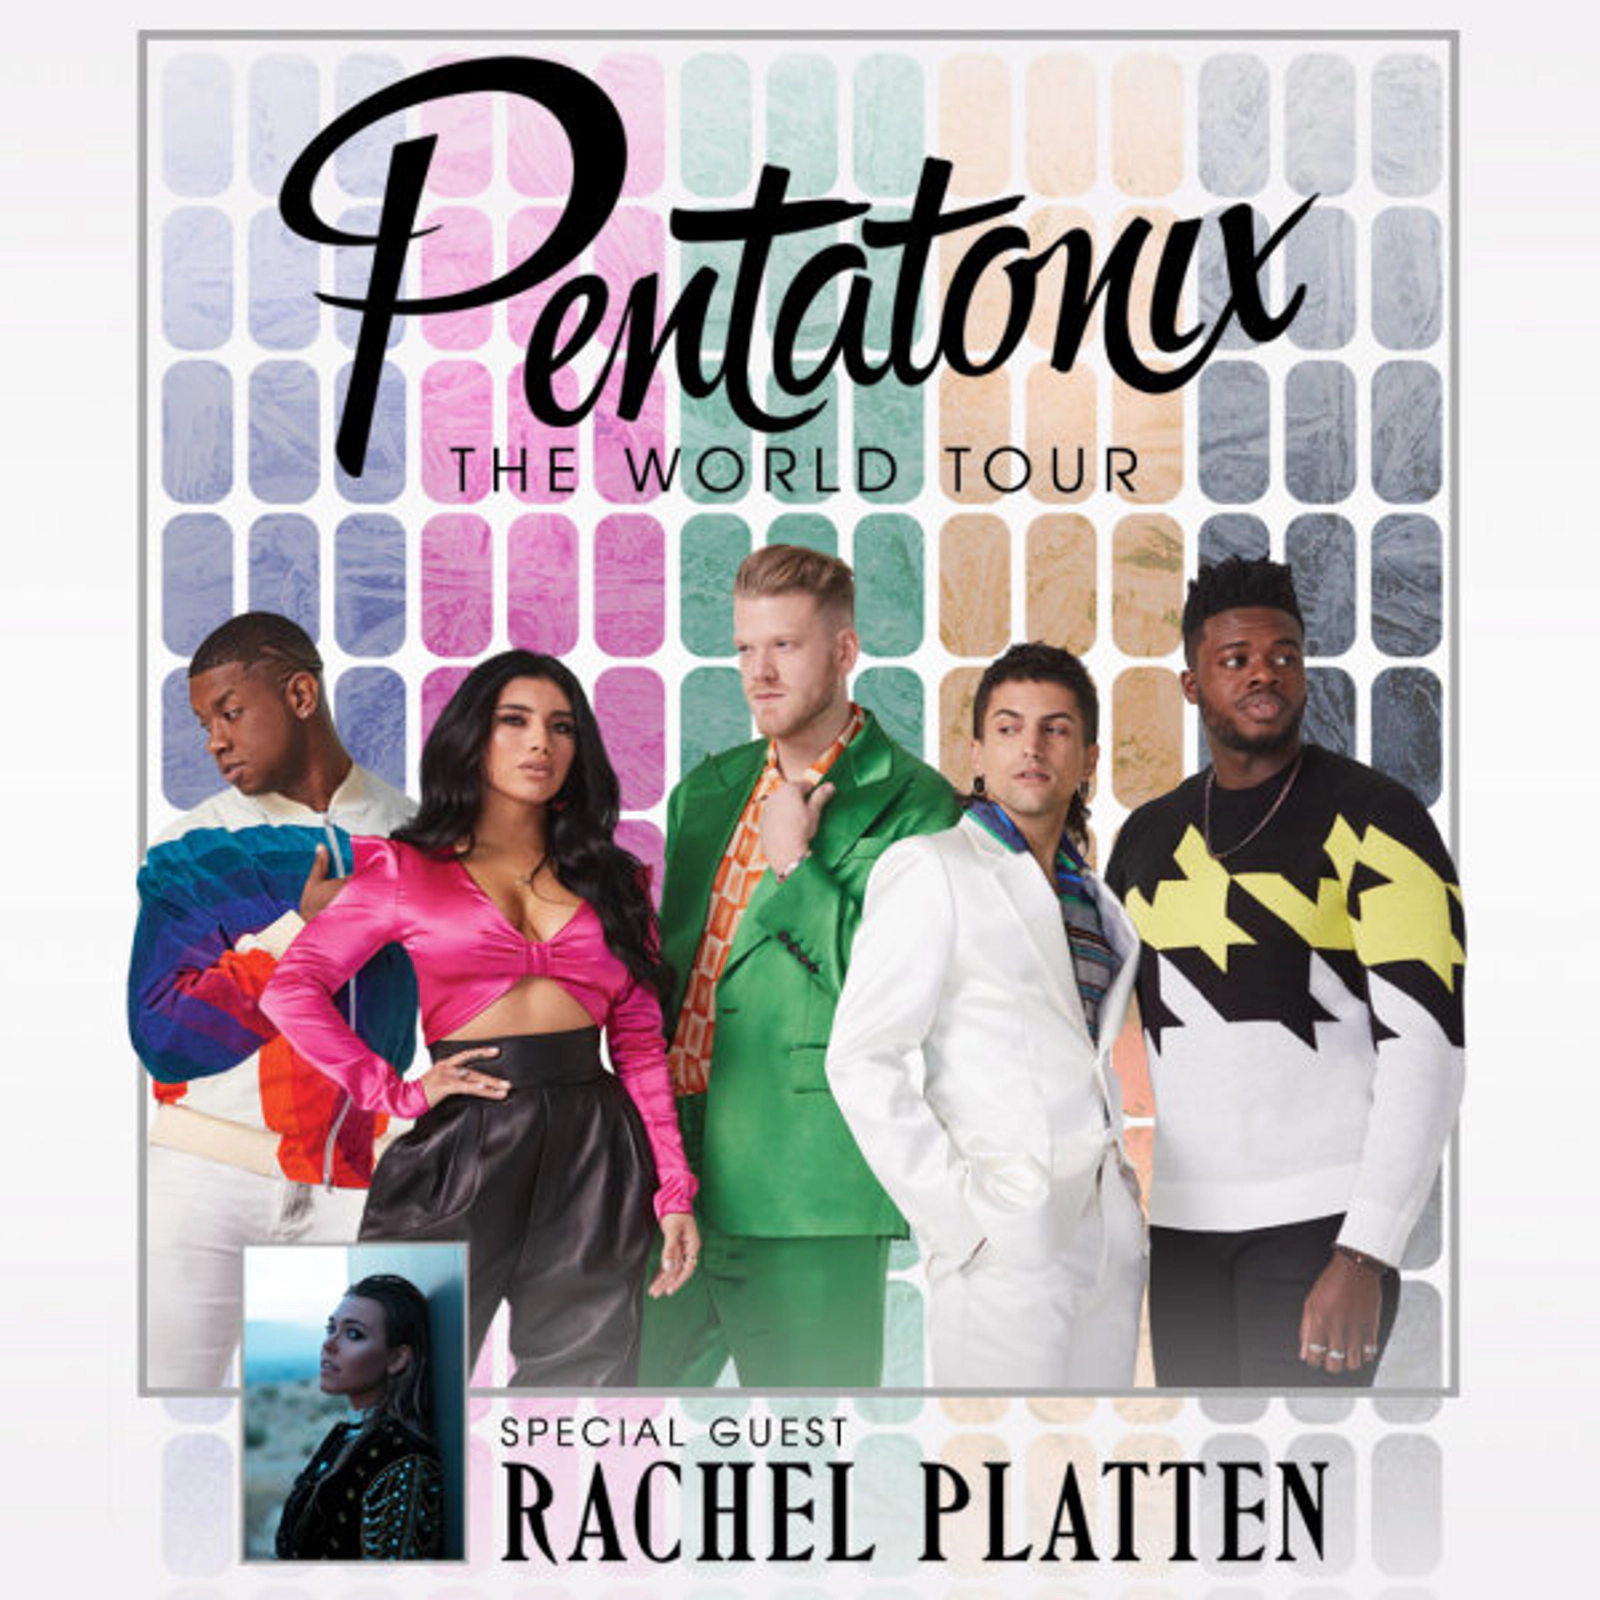  Win your tickets to see Pentatonix!  - Thumbnail Image